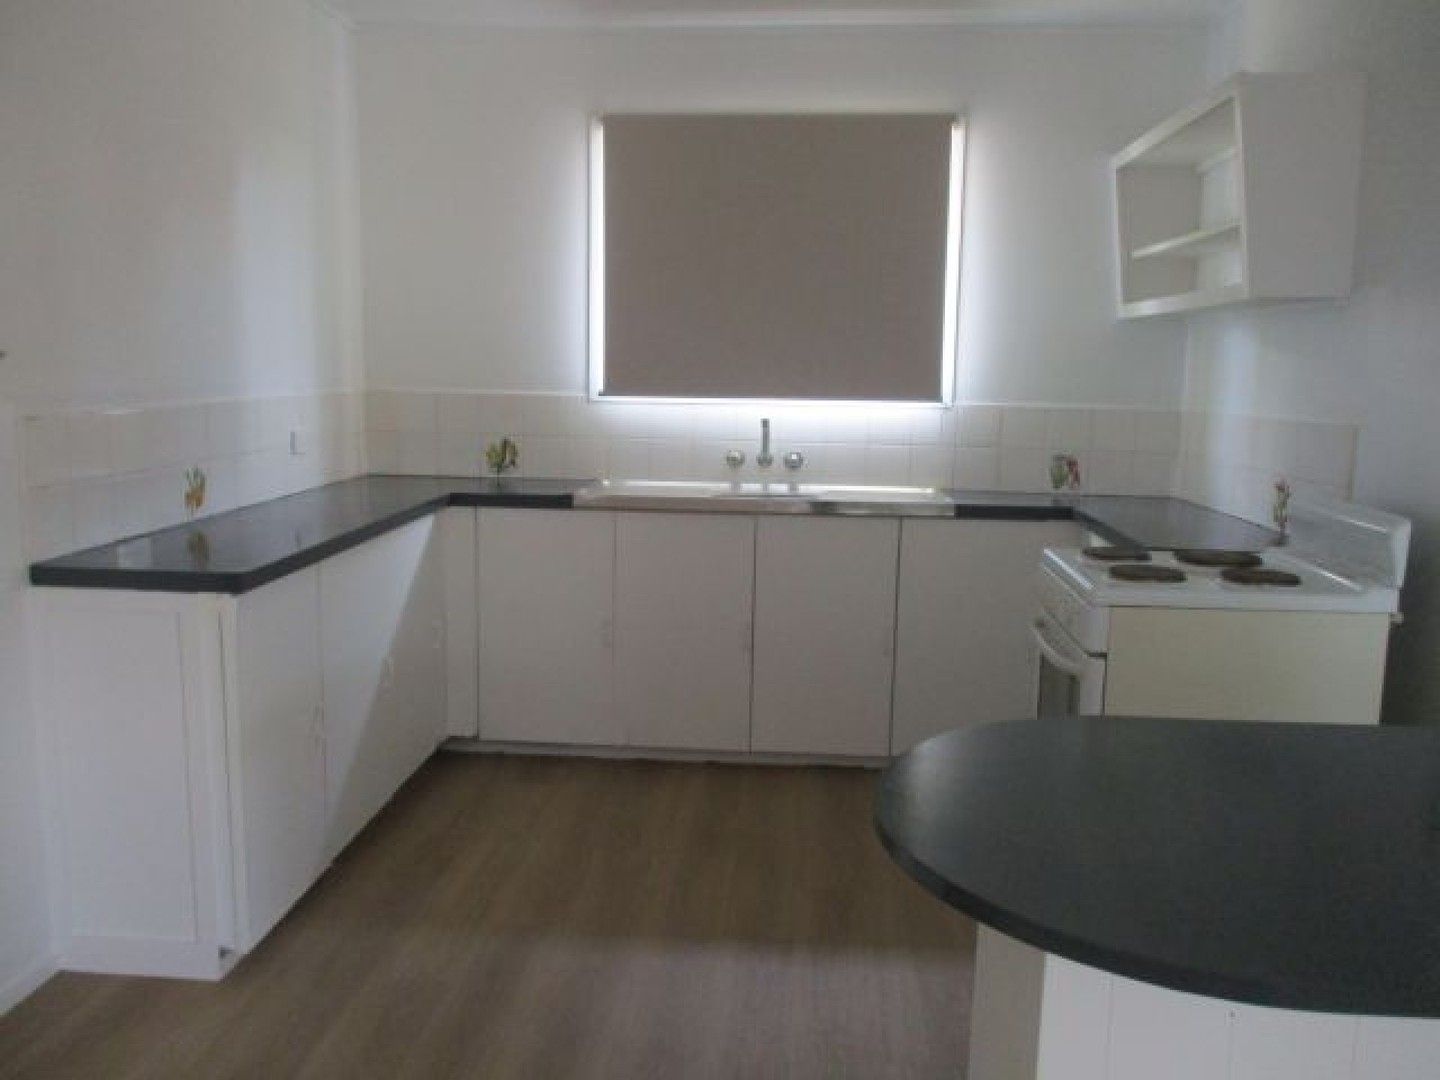 2 bedrooms Apartment / Unit / Flat in 1/20 MELVILLE Street MARYBOROUGH QLD, 4650